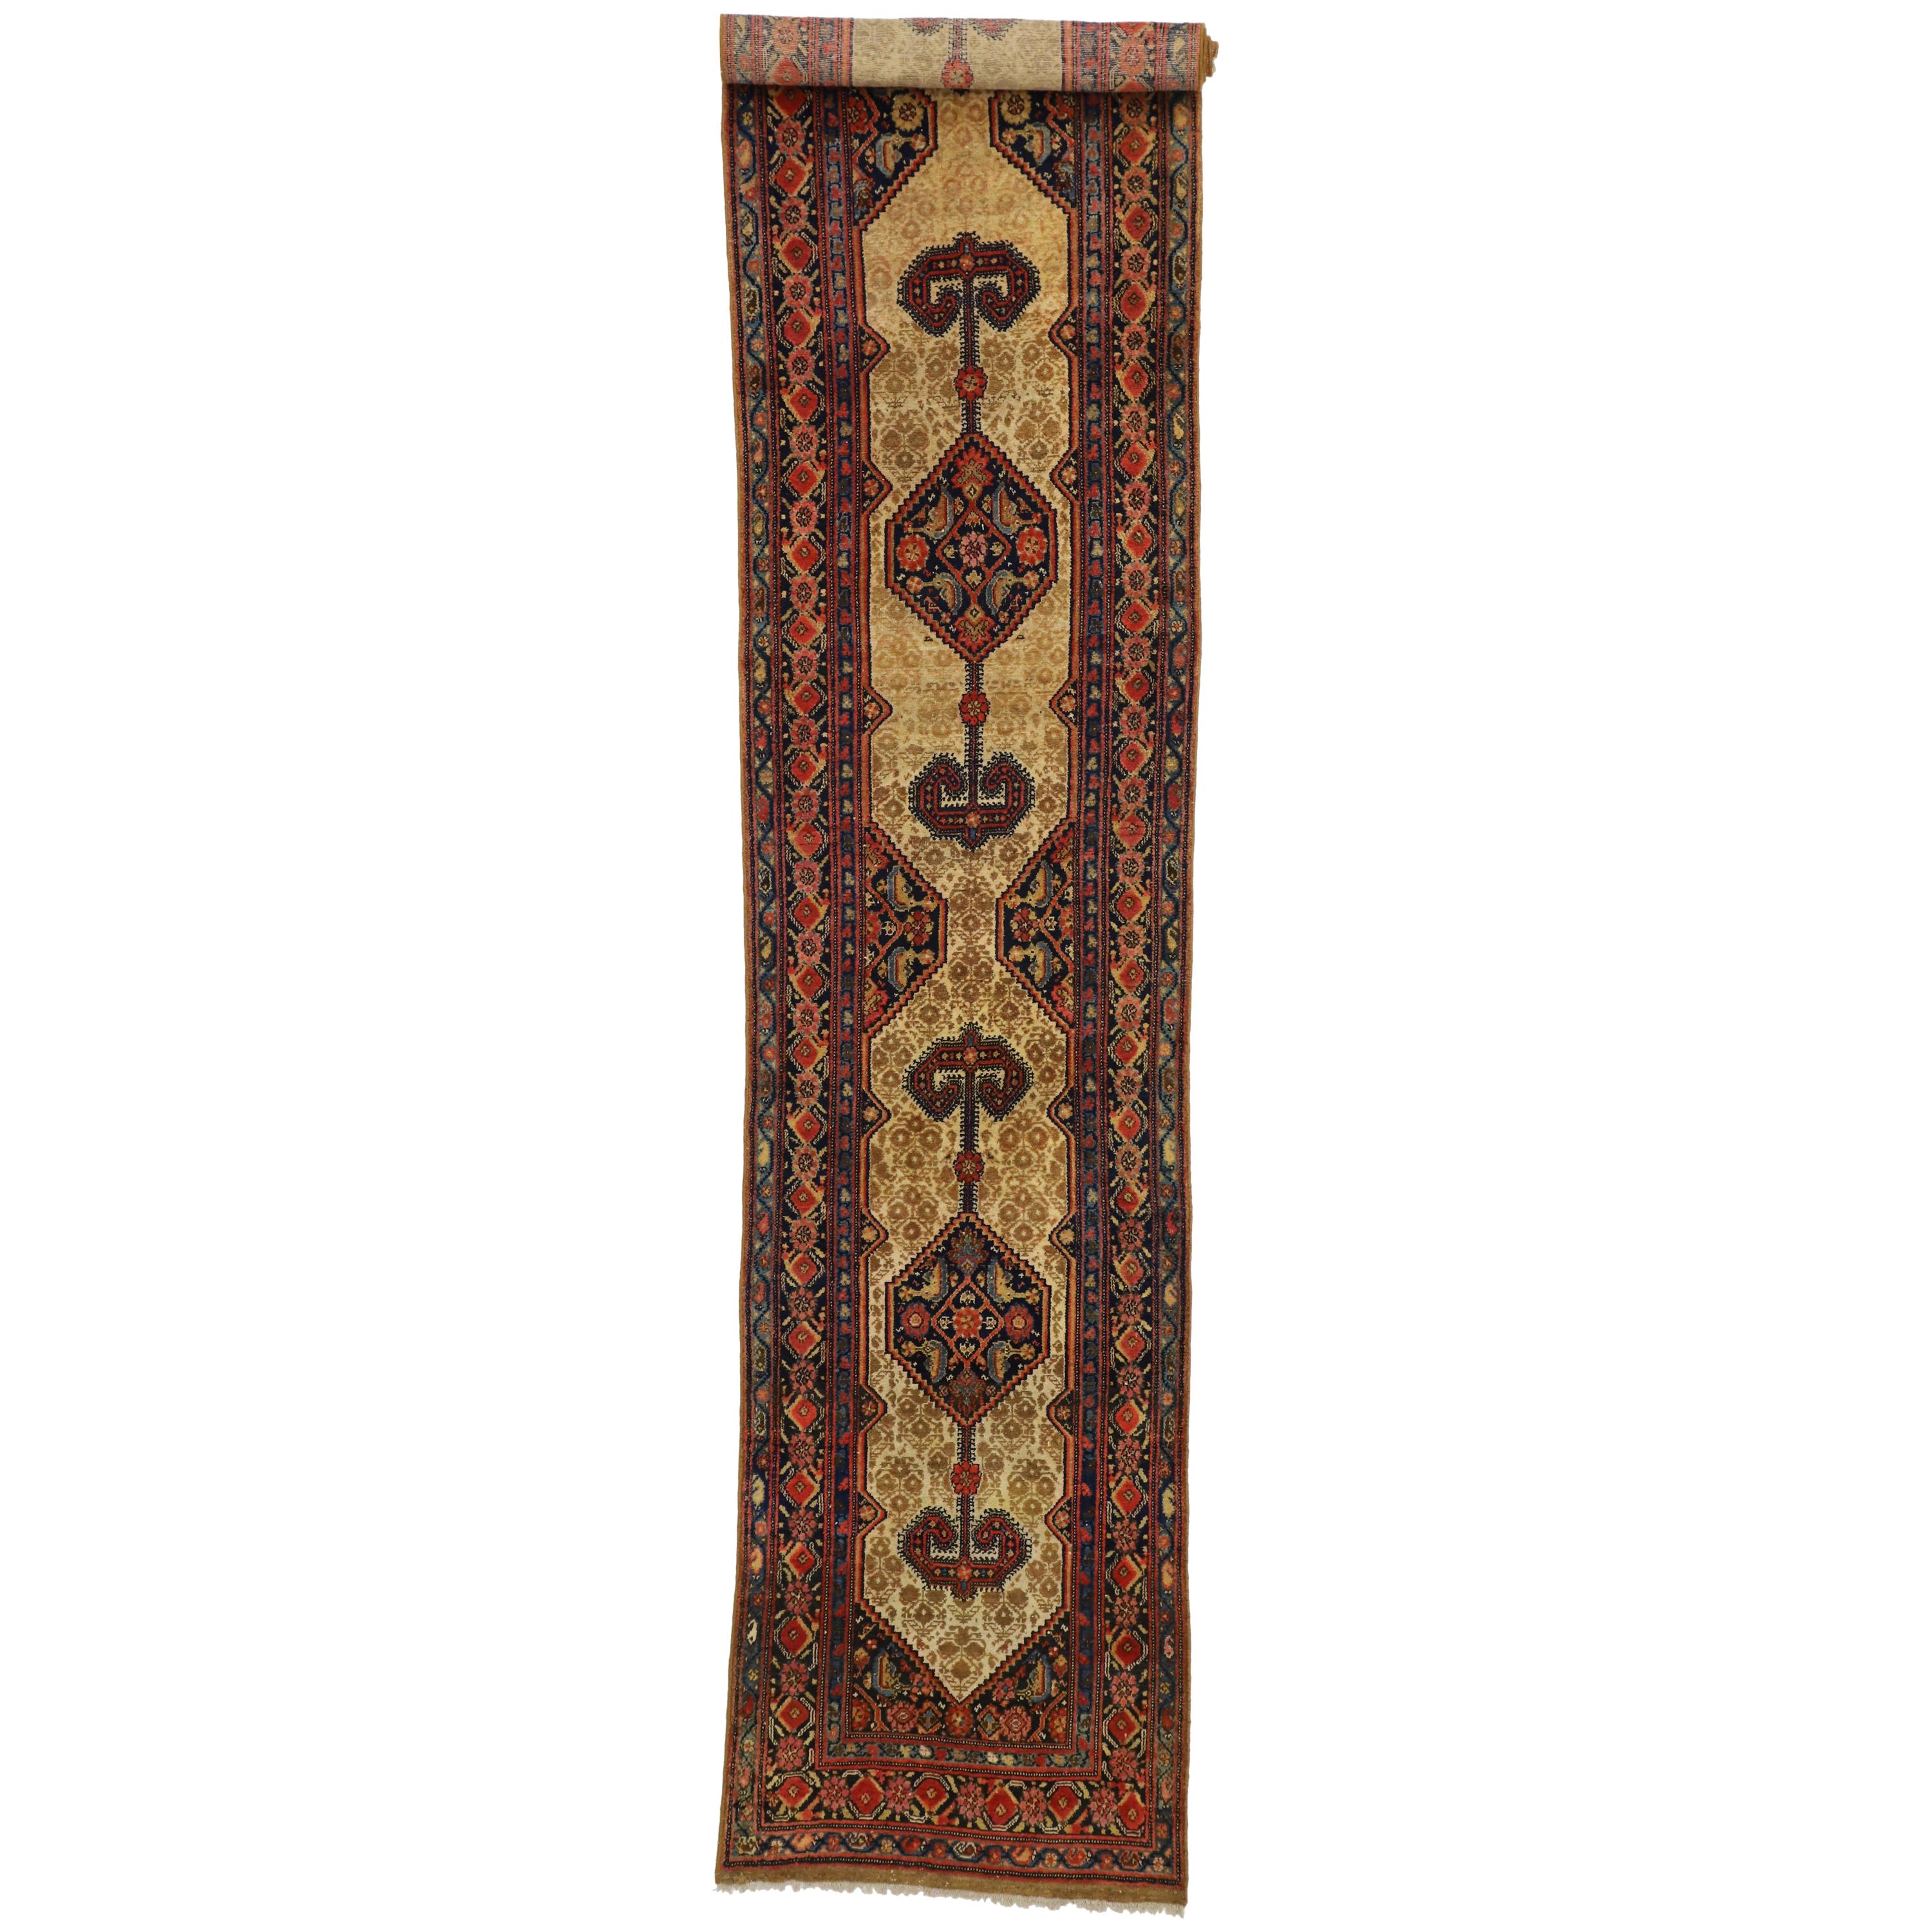 Antique Persian Malayer Long Hallway Runner with Tudor Manor House Style